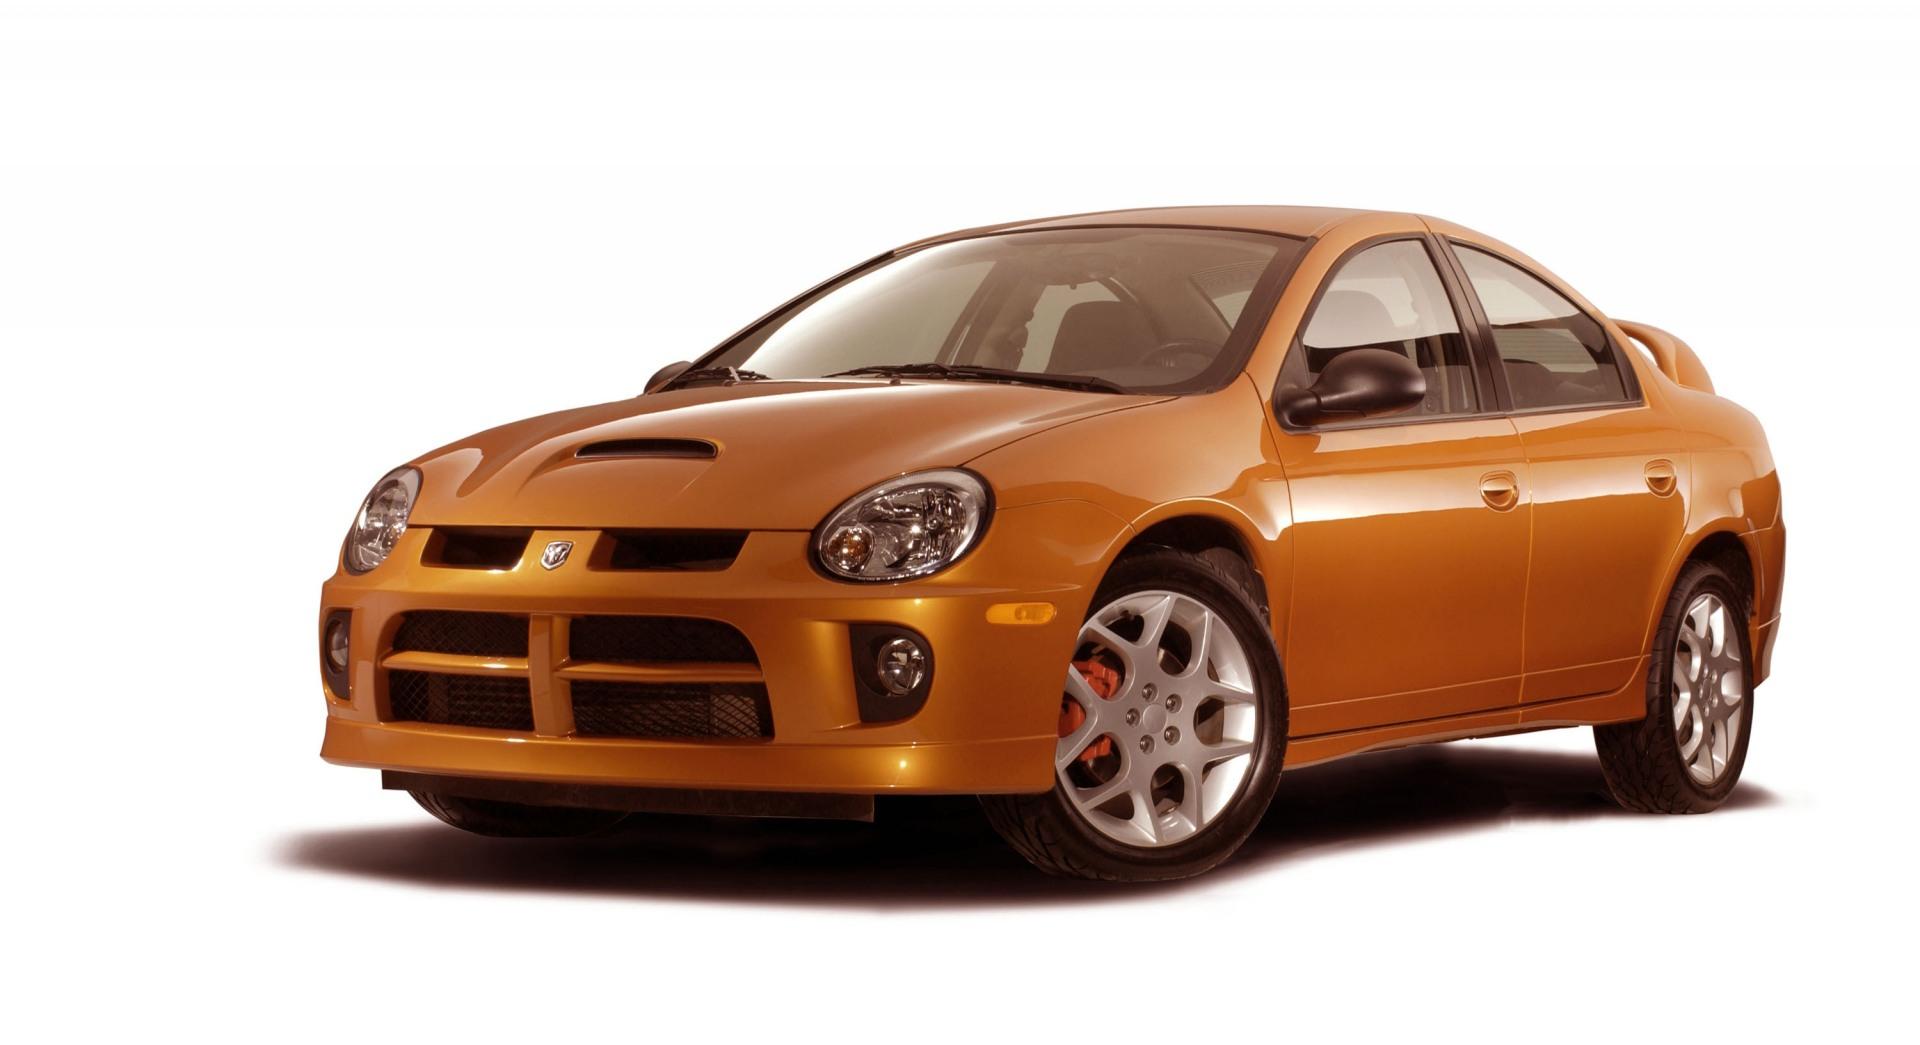 Menu items for the 2005 Dodge Neon. 